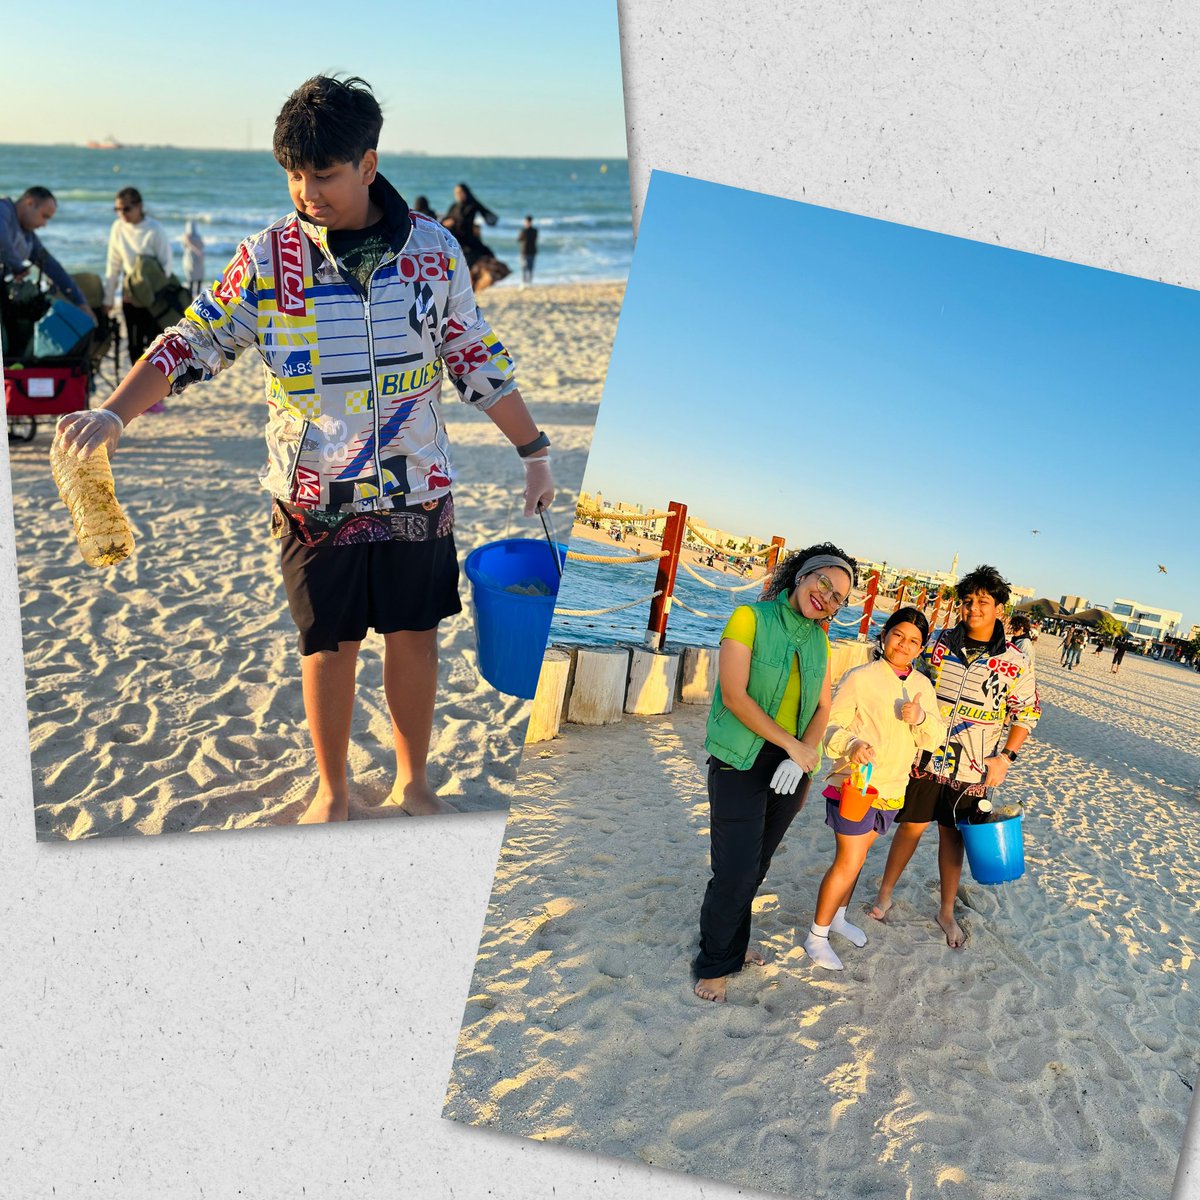 @AryaAvyan @DubaiCollege On the occasion of UAE National Environment Day, Avyan Y9, joined a beach cleanup drive.He not only volunteered to the task but also spread awareness by talking to people around the area. A well spent Sunday!
#Uaenationalenvironmentday 
#doingmybit